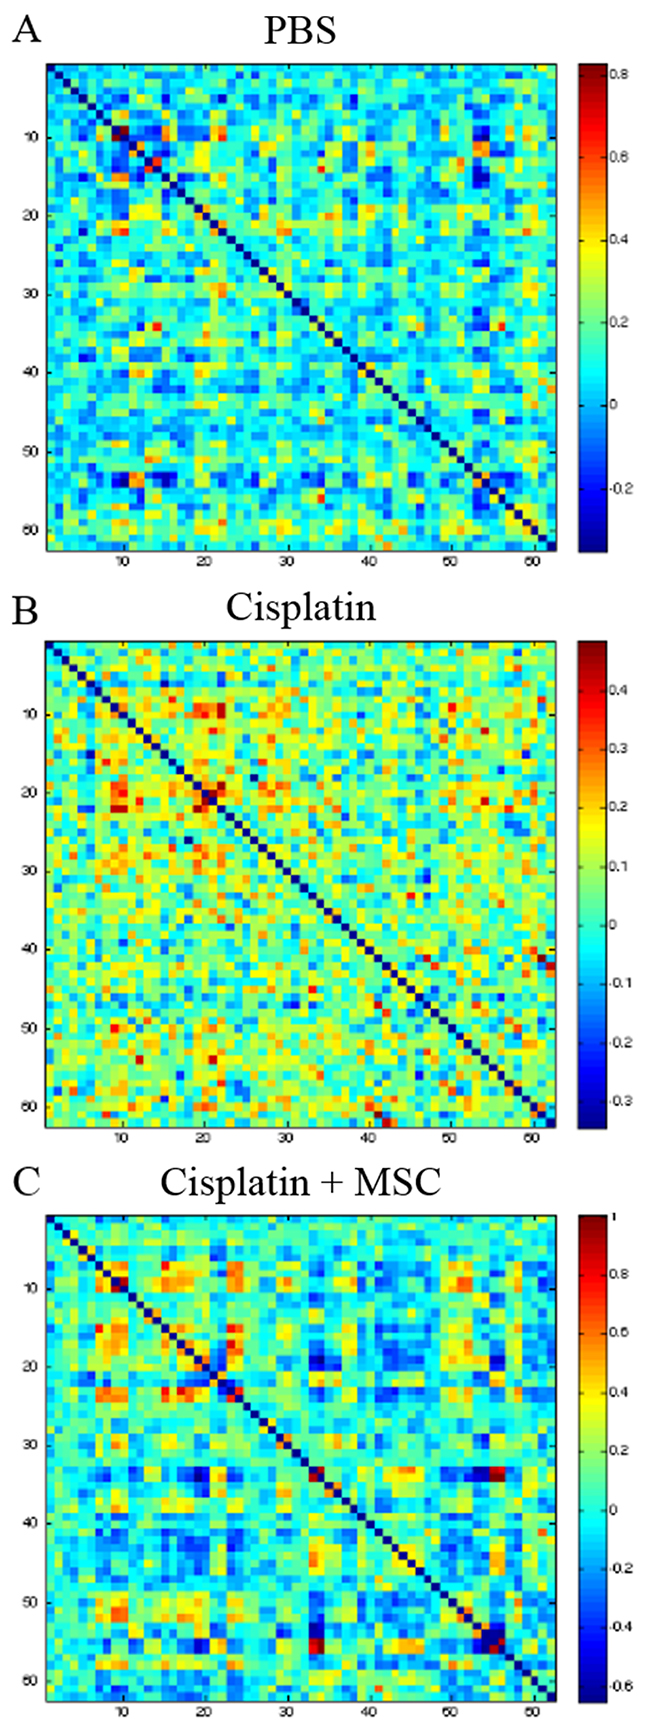 Figure 3: Effect of cisplatin and MSC on brain functional connectivity.